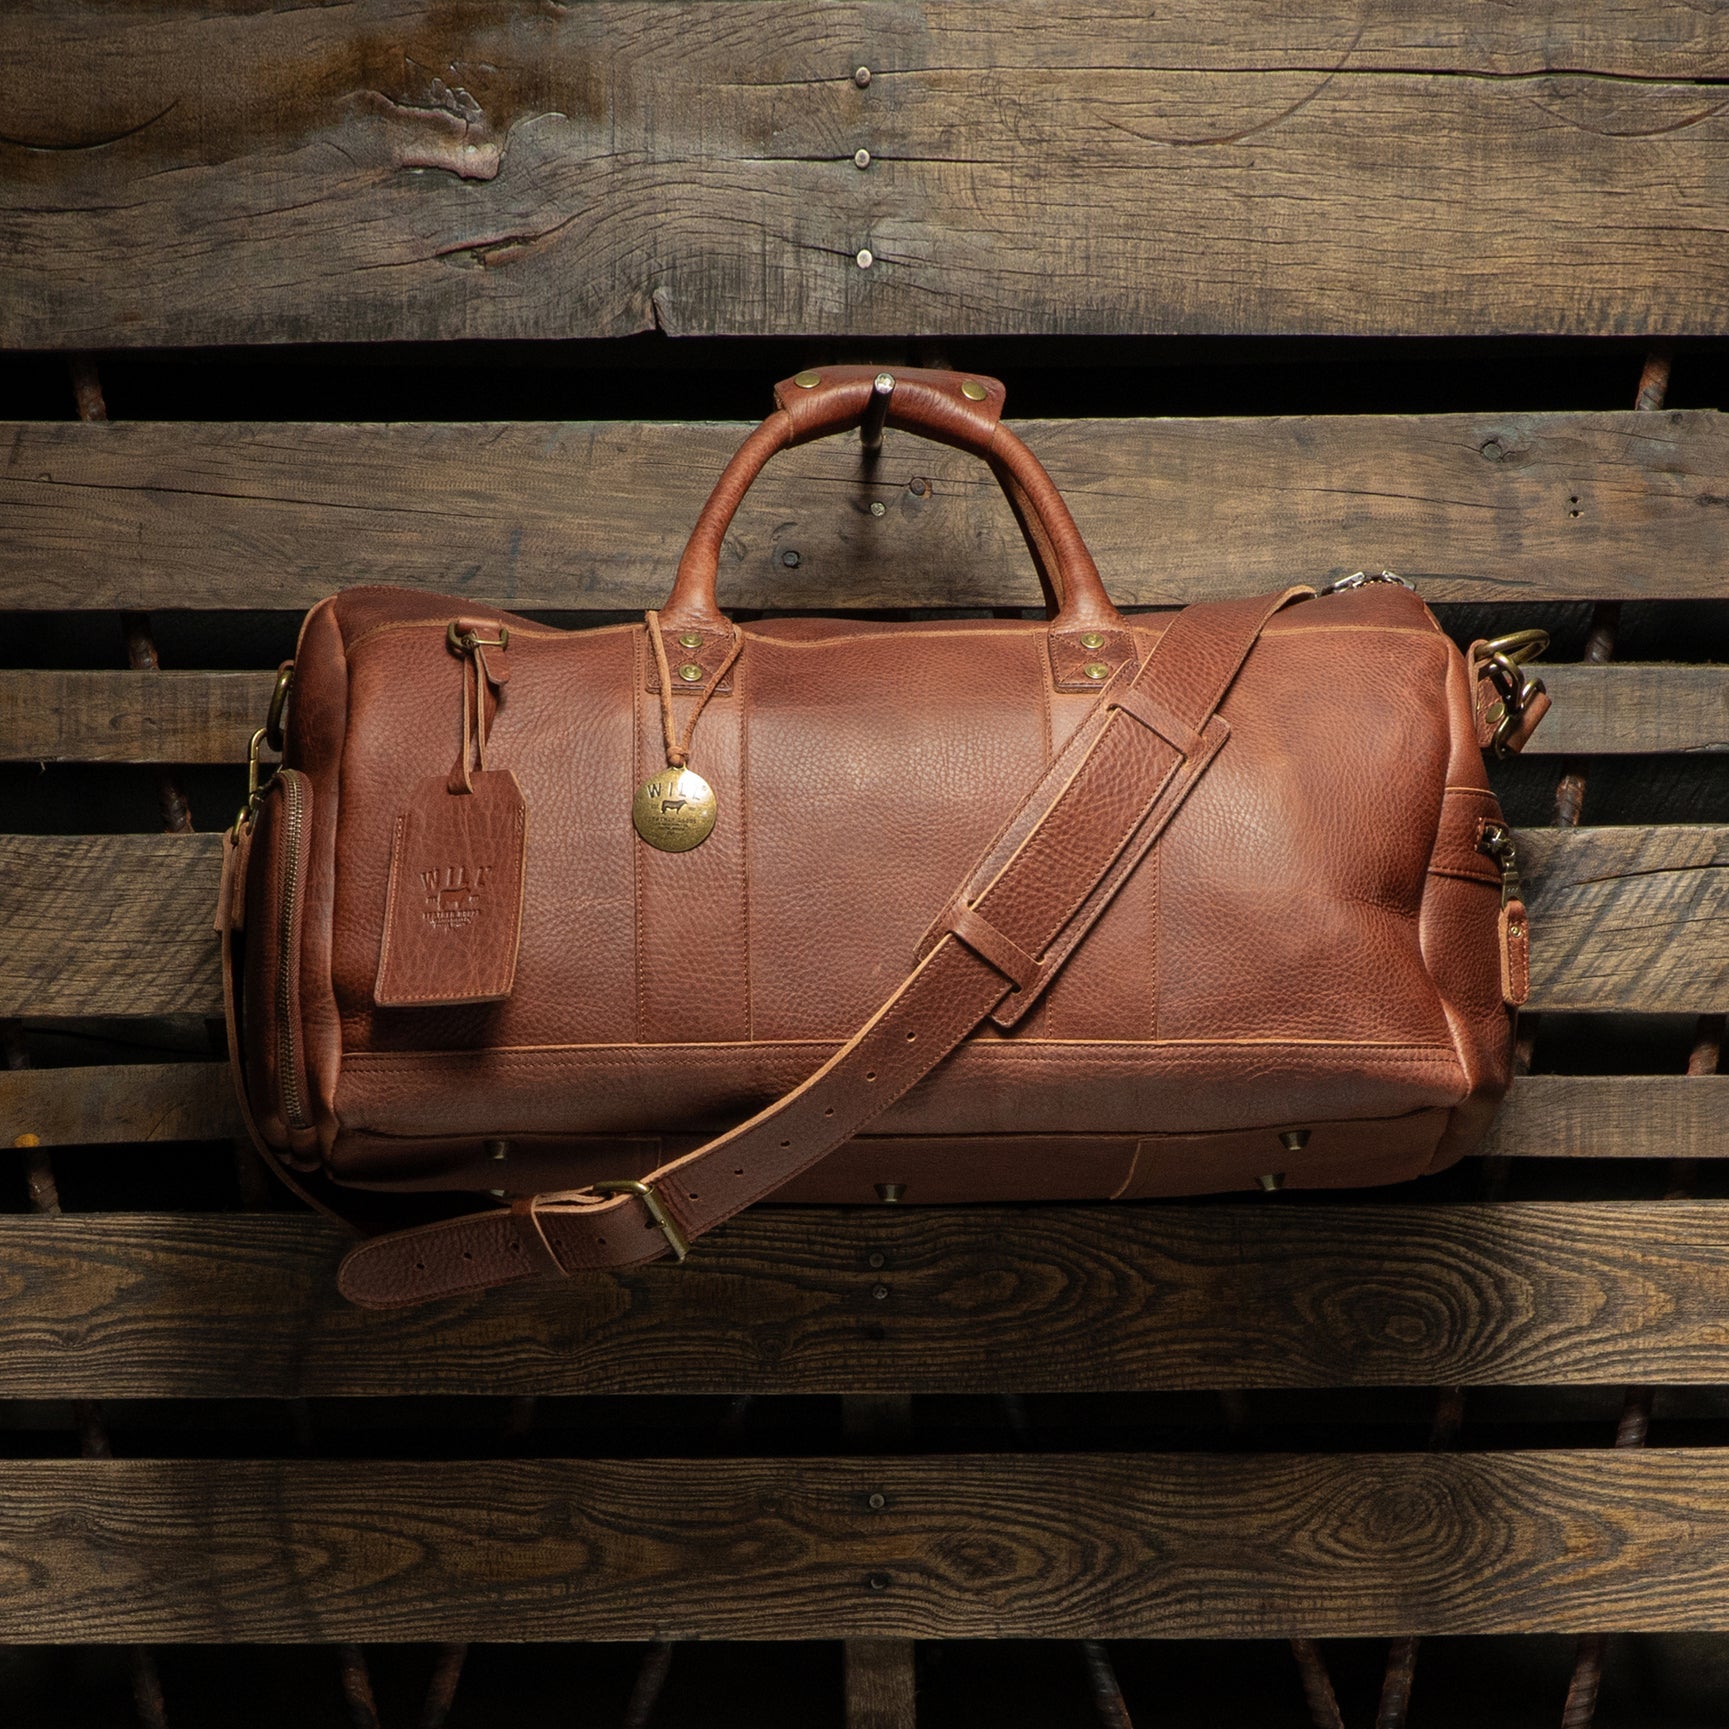 Atticus Leather Shoe Duffle in Cognac by Will Leather Goods